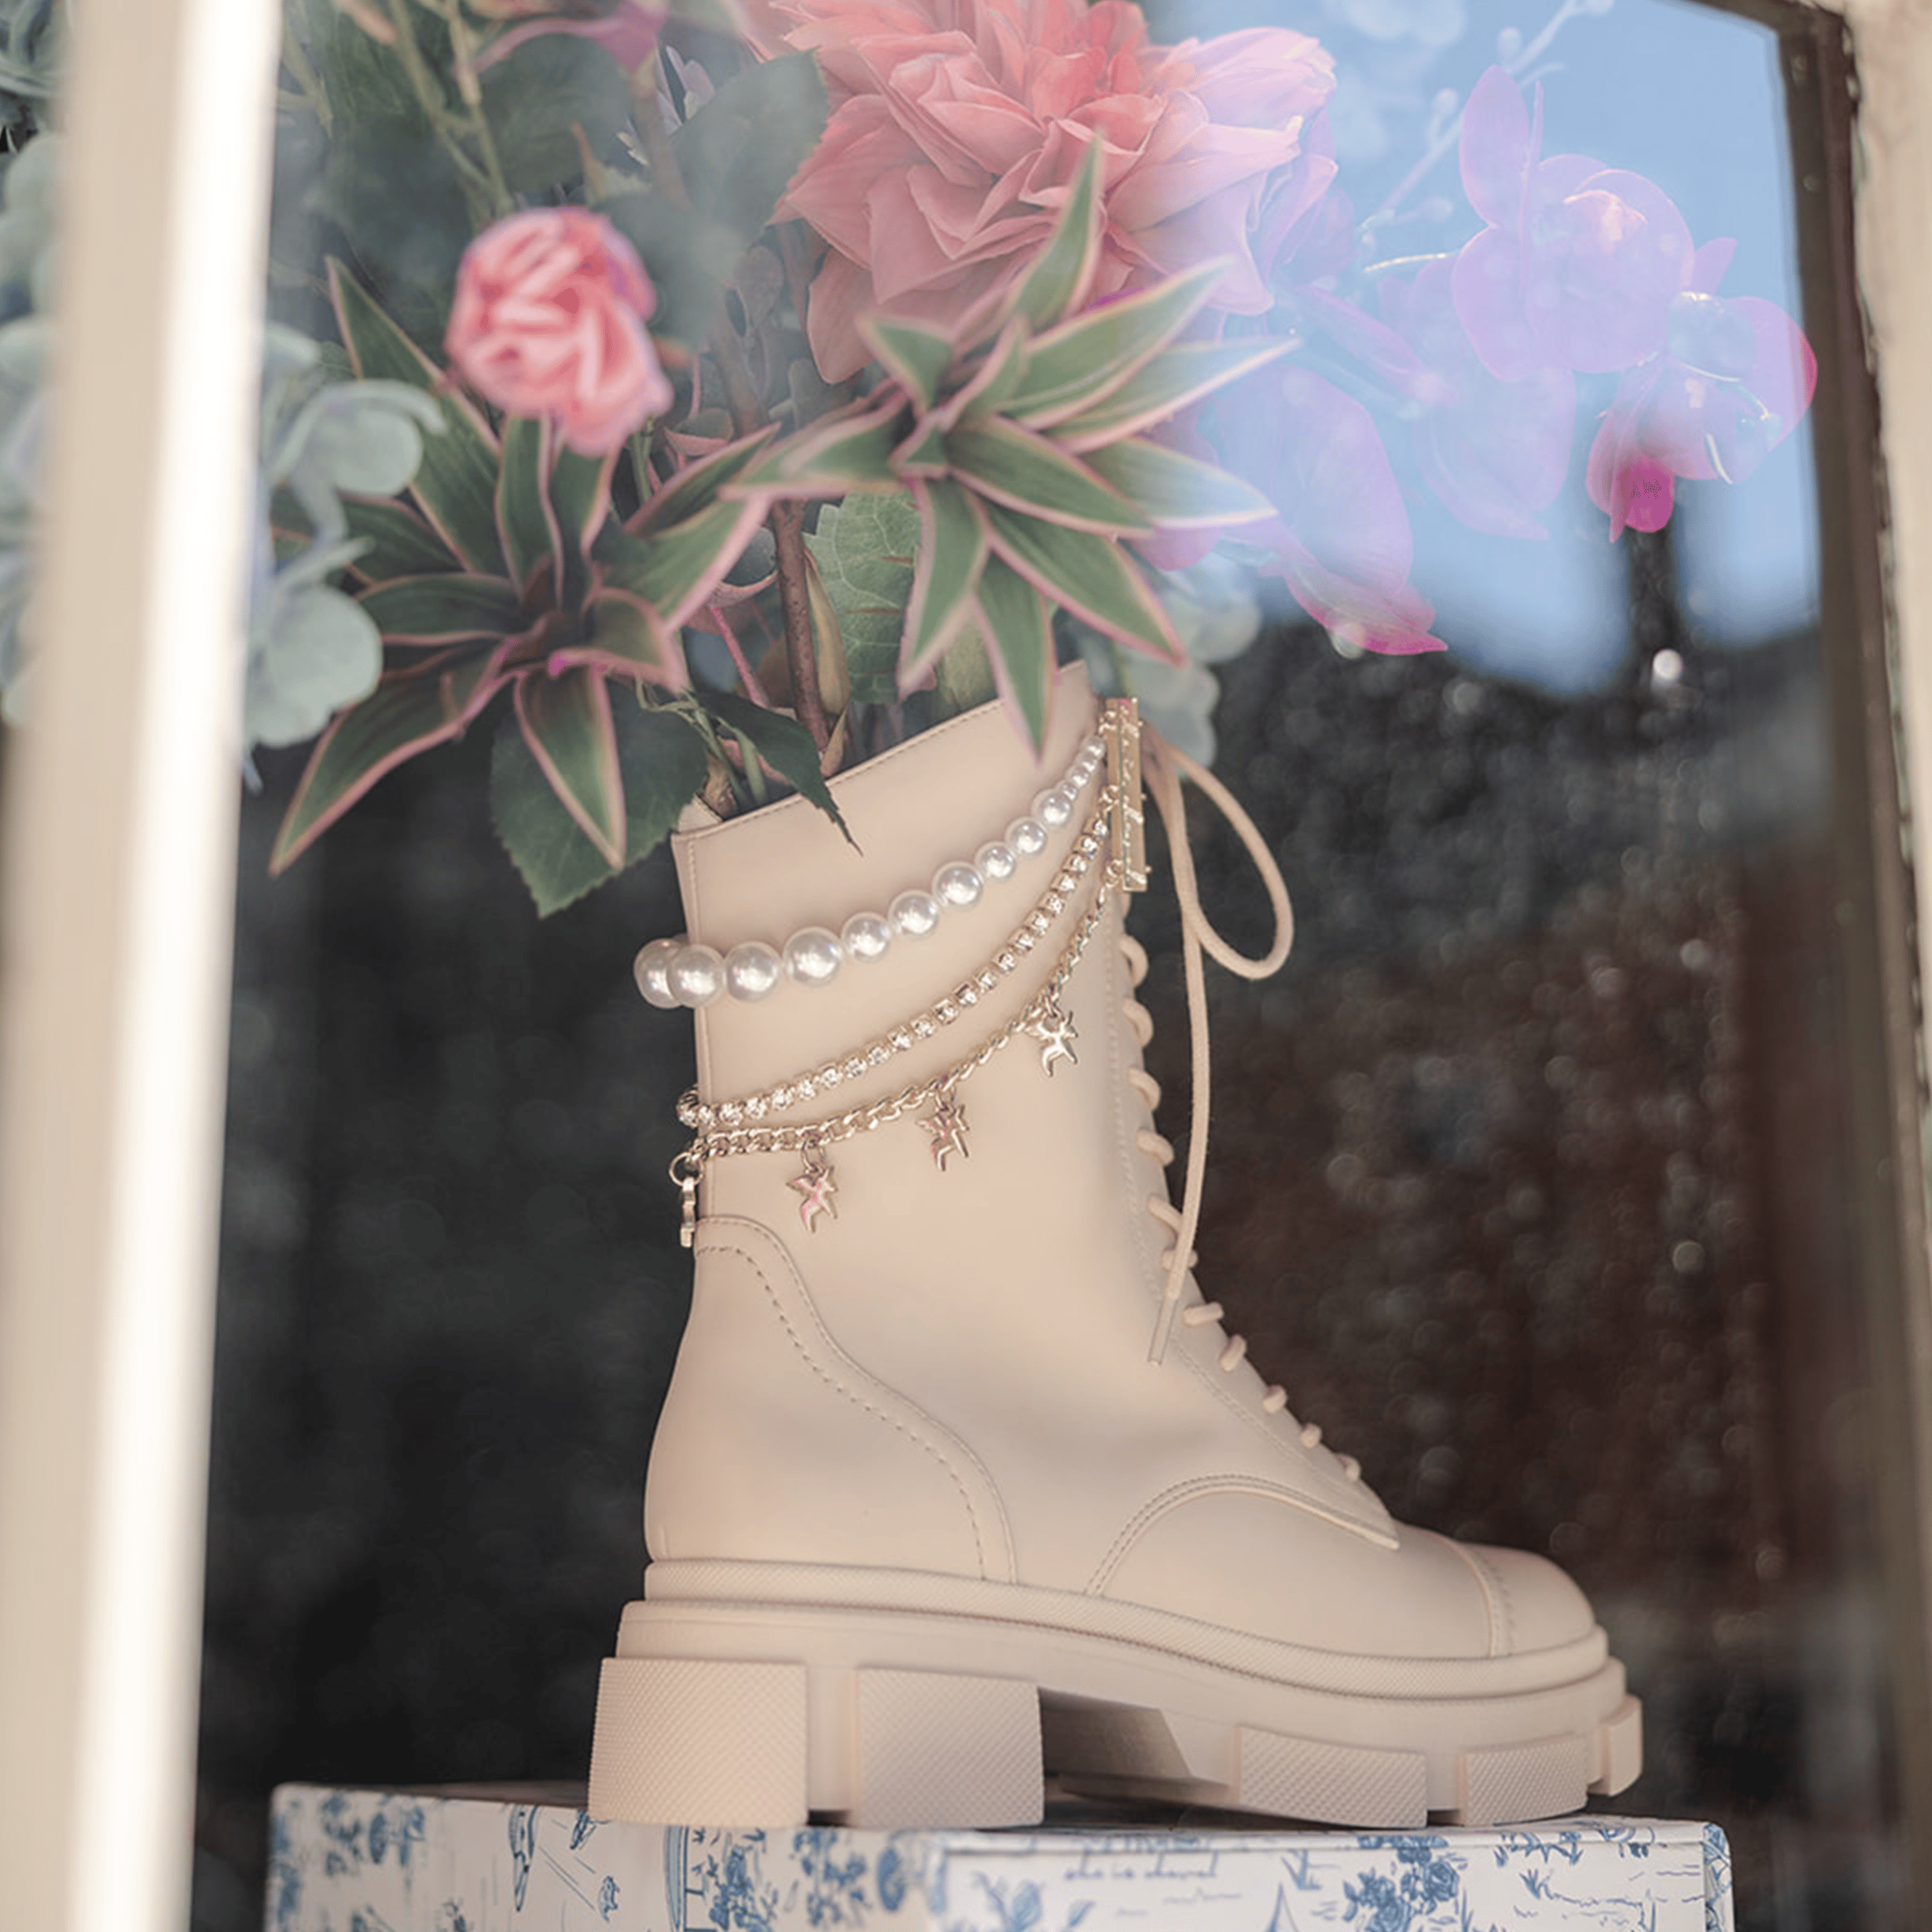 Beige combat boot decorated with roses and pearls on window display at She is Cheval pop-up at the Seaport